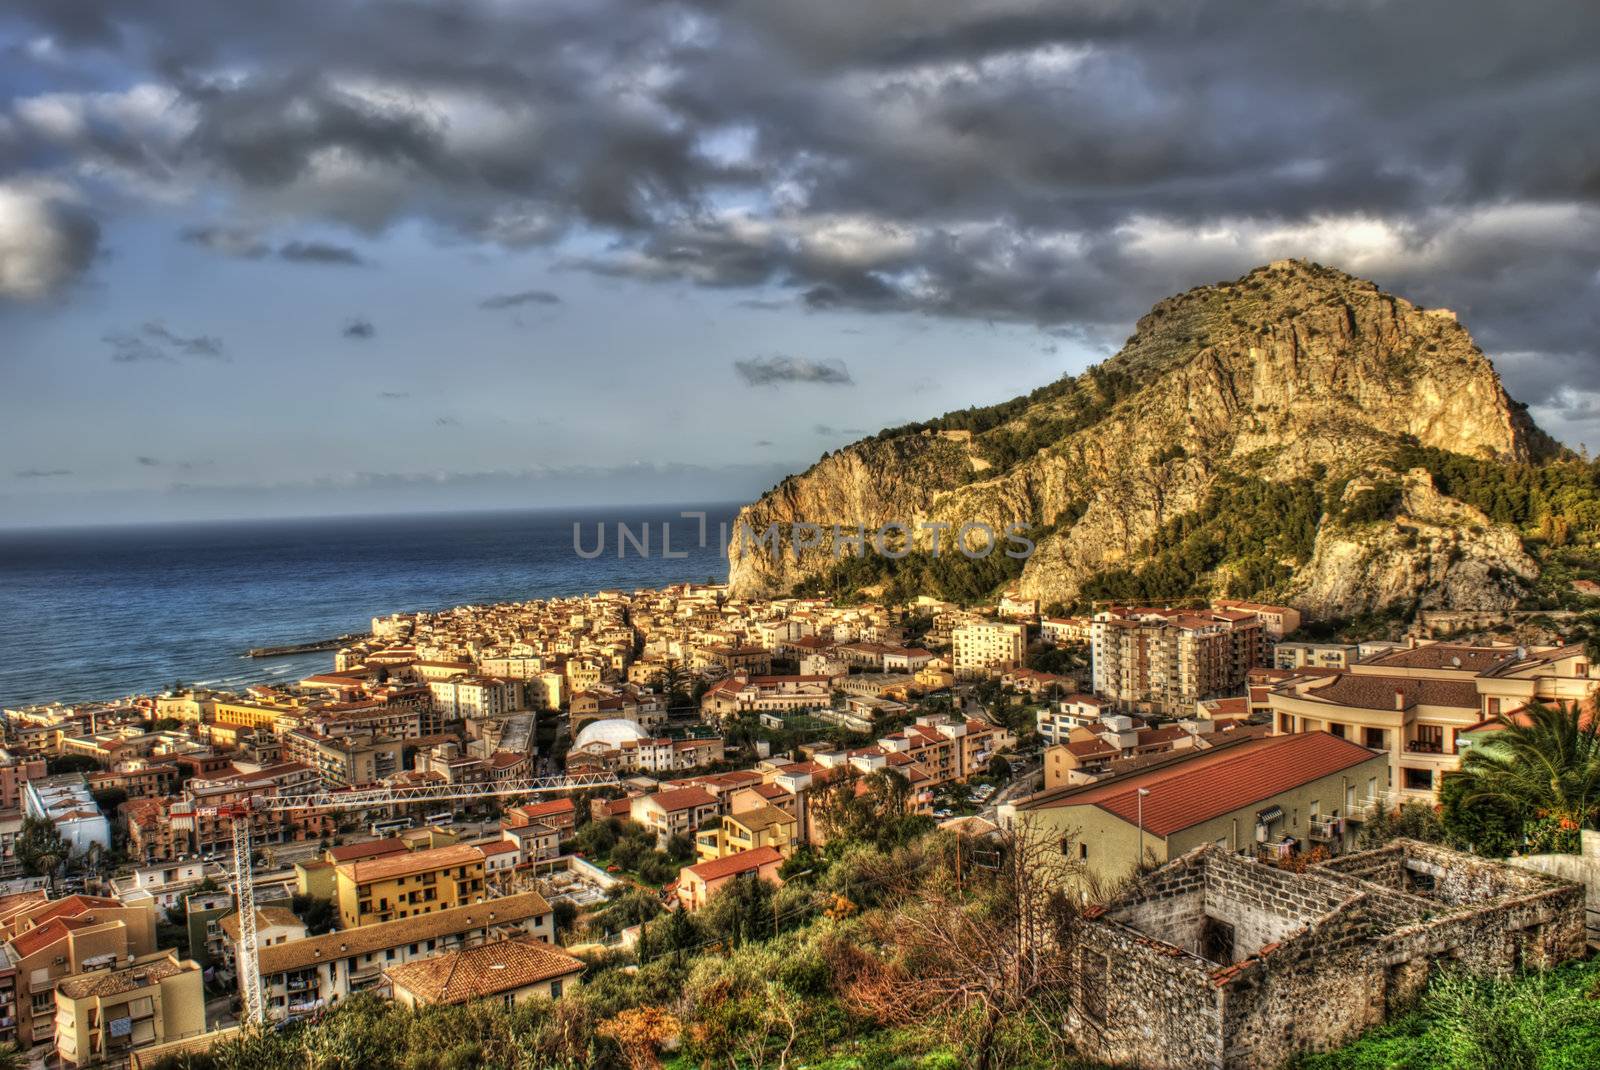 View of the Cefalù in the hdr by gandolfocannatella